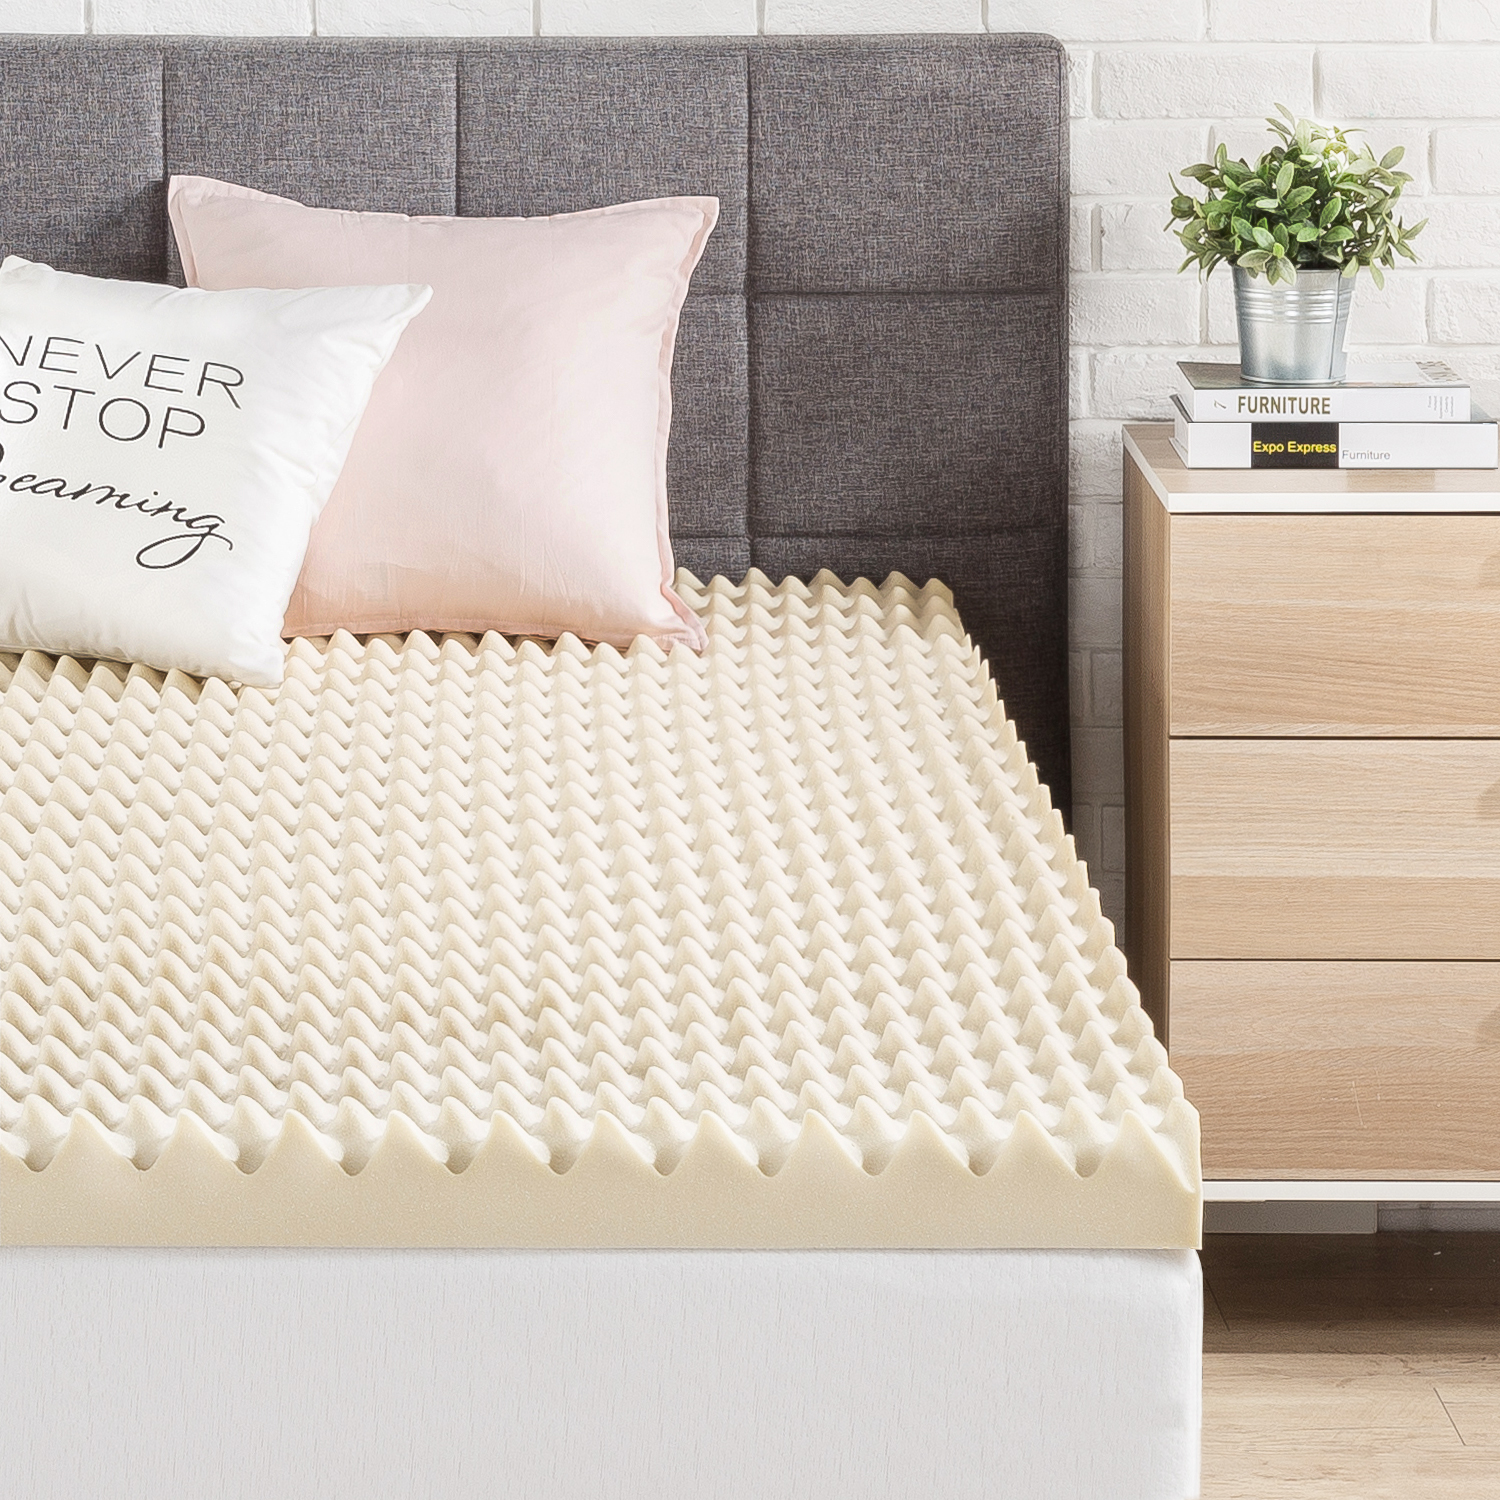 Mellow 3" Egg Crate Memory Foam Mattress Topper with Copper Infusion, Full - image 3 of 7